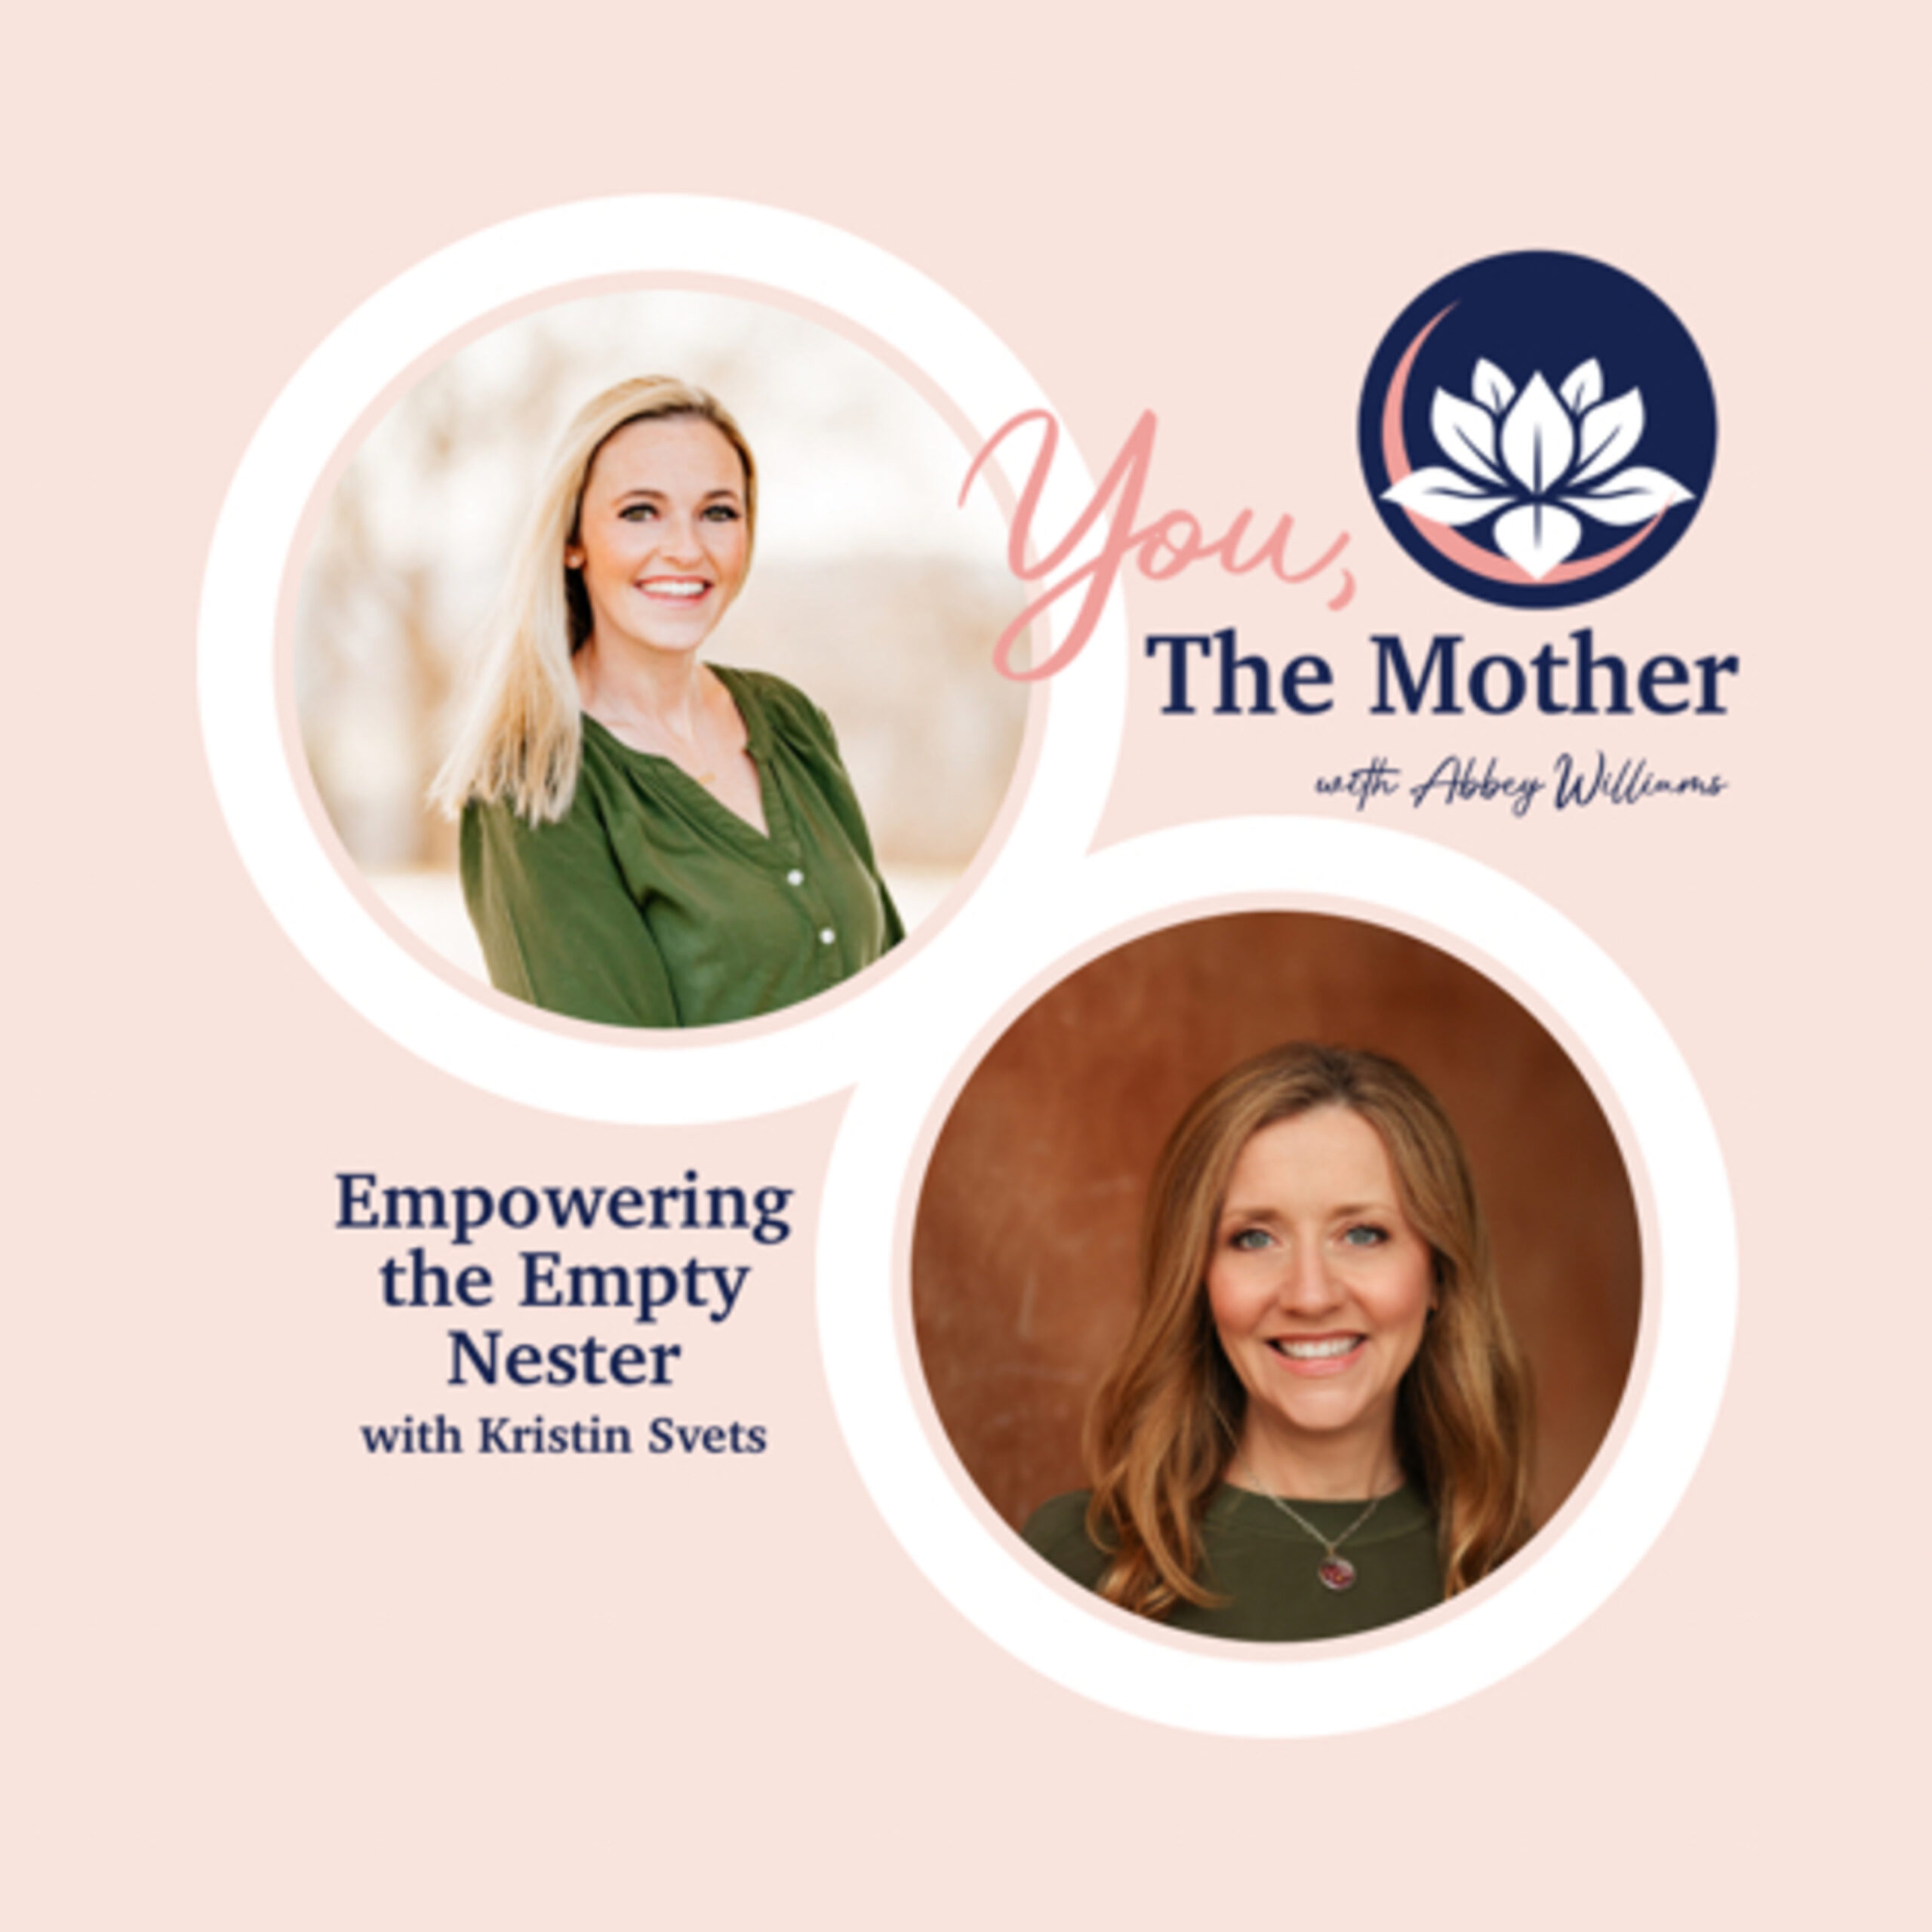 Empowering The Empty Nester with Kristin Svets